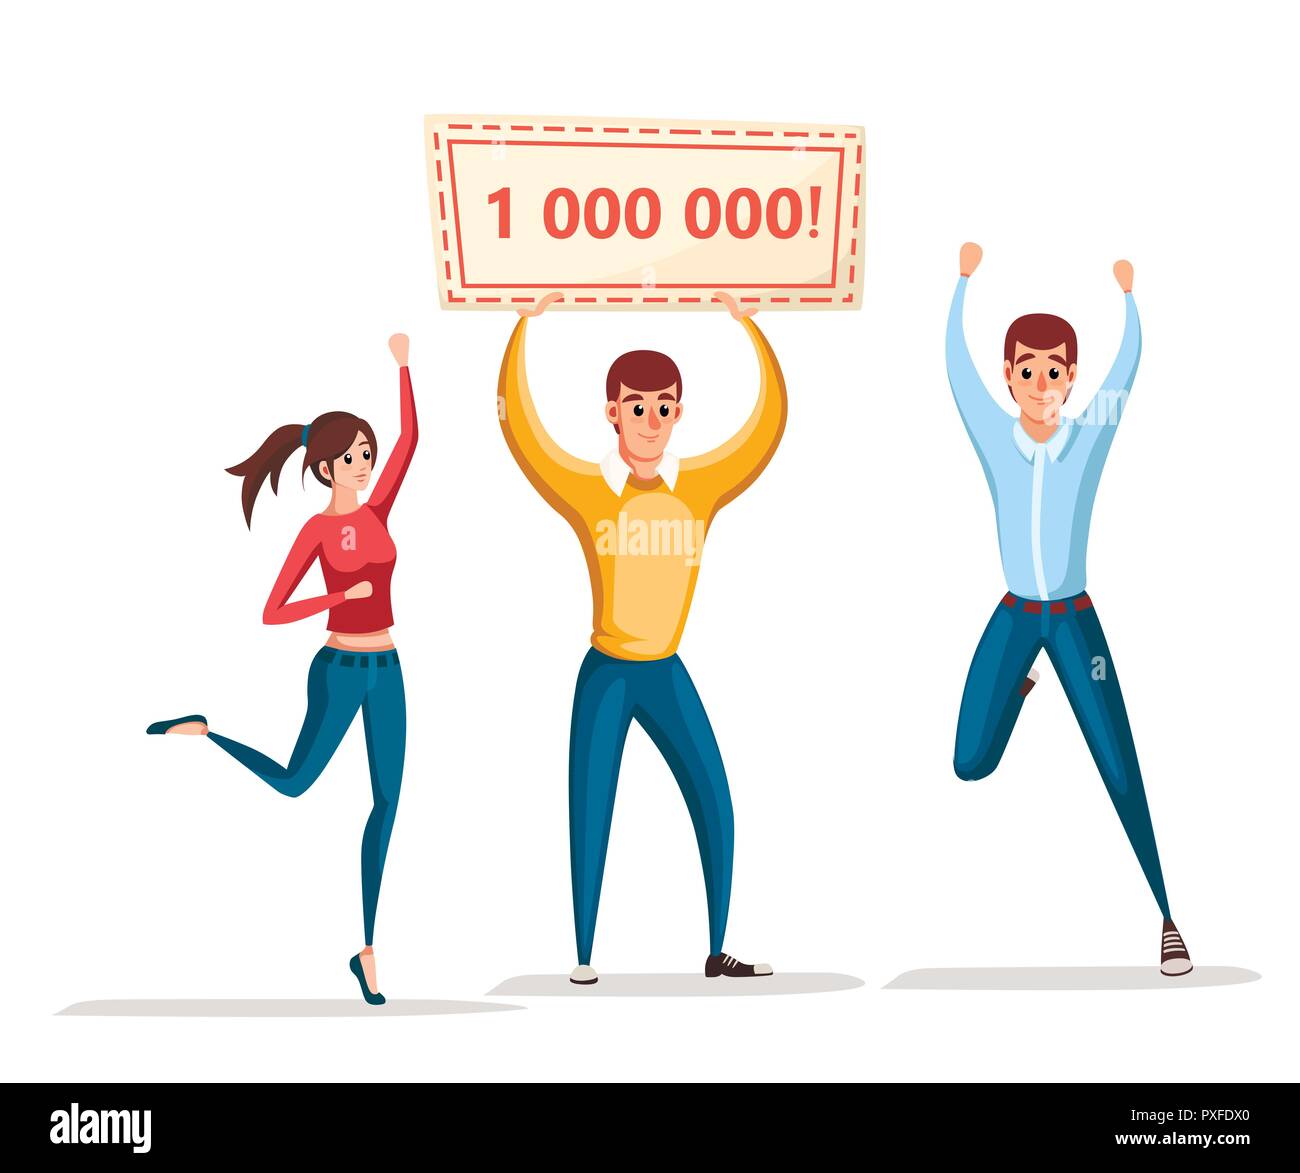 Lottery winner. Women and man stand with winner banner, 1000000. Happy people. Win million. Cartoon character design. Flat vector illustration isolate Stock Vector